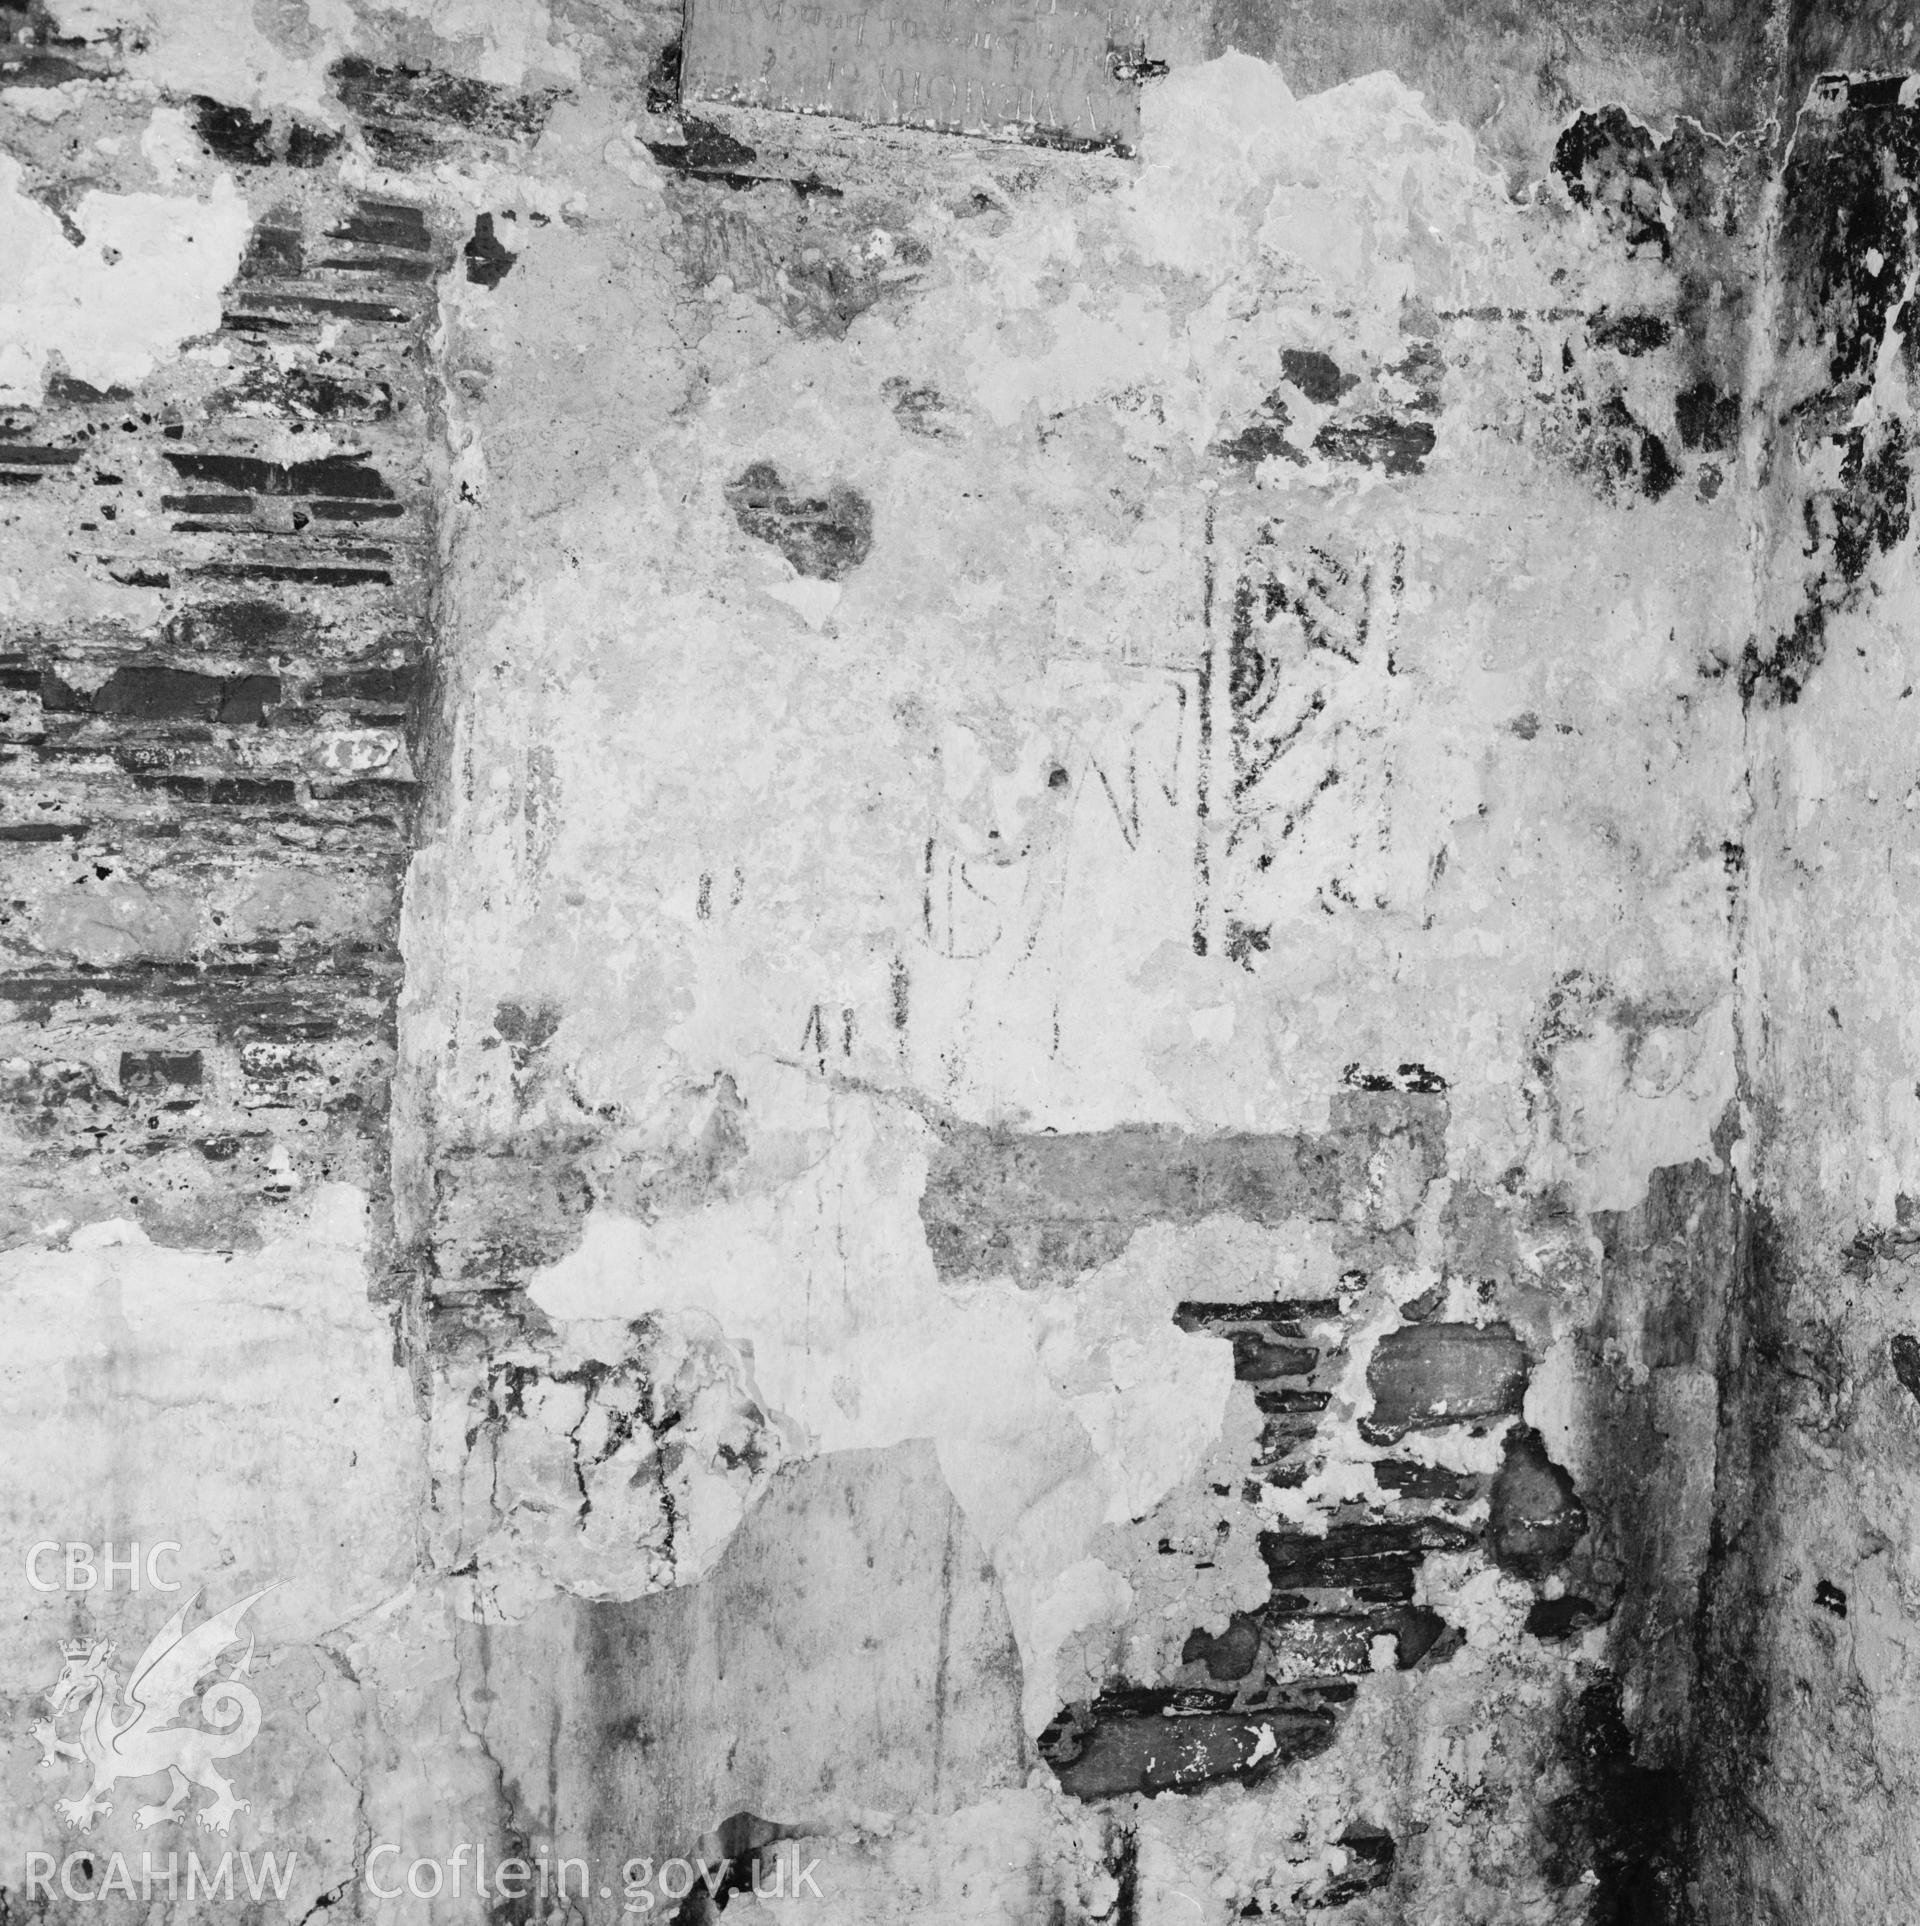 View of a wall painting at St.Teilo's Church, Llandeilo Talybont taken 1984.